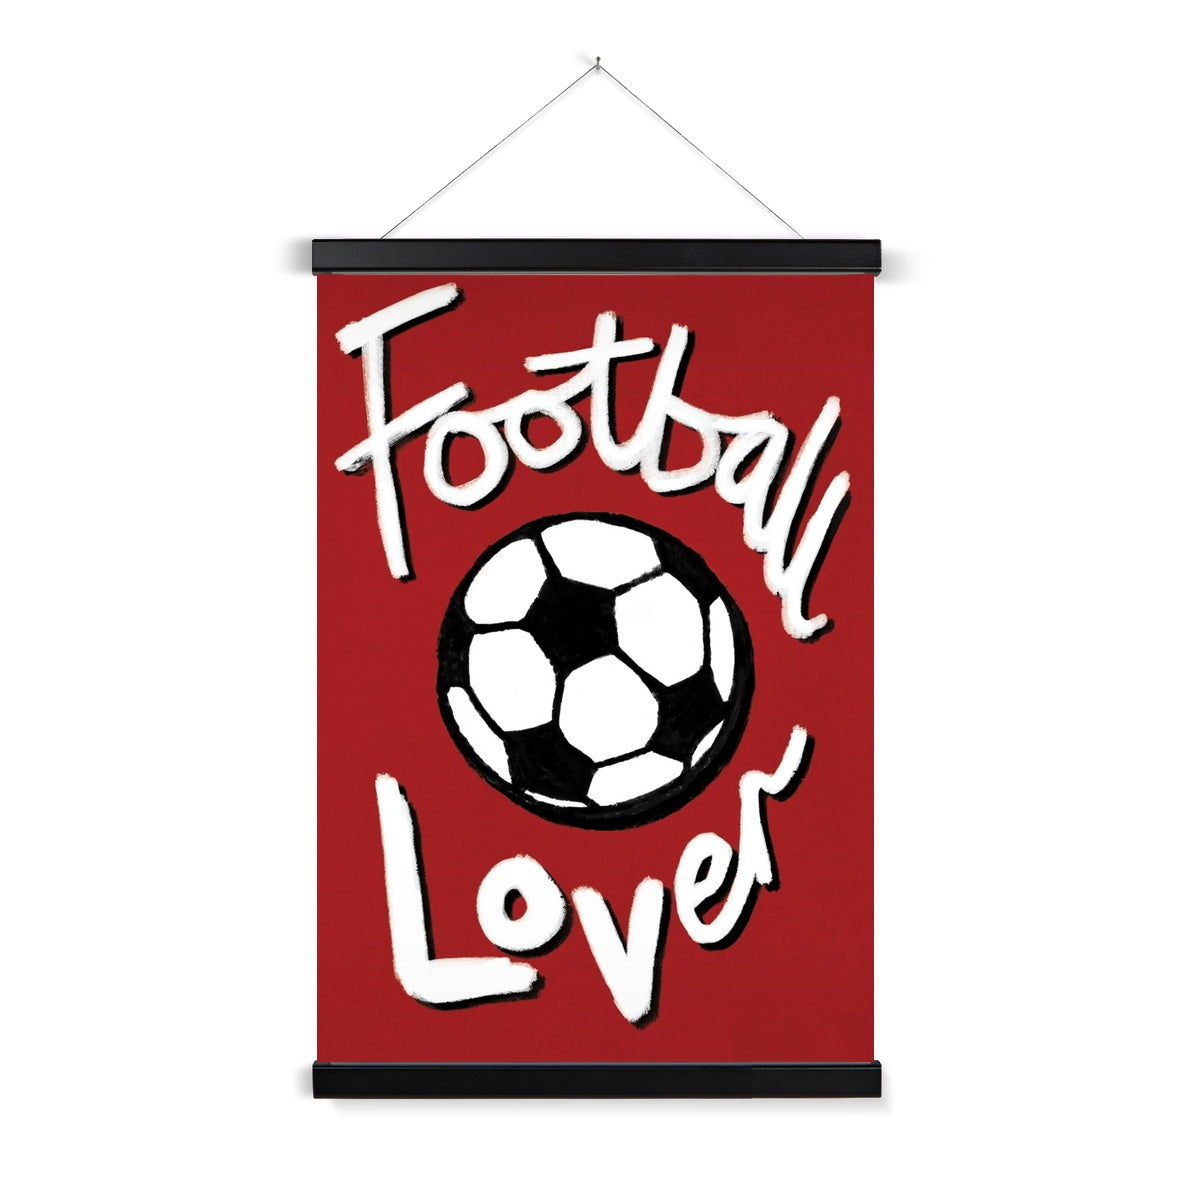 Football Lover - Red, Black and White Fine Art Print with Hanger